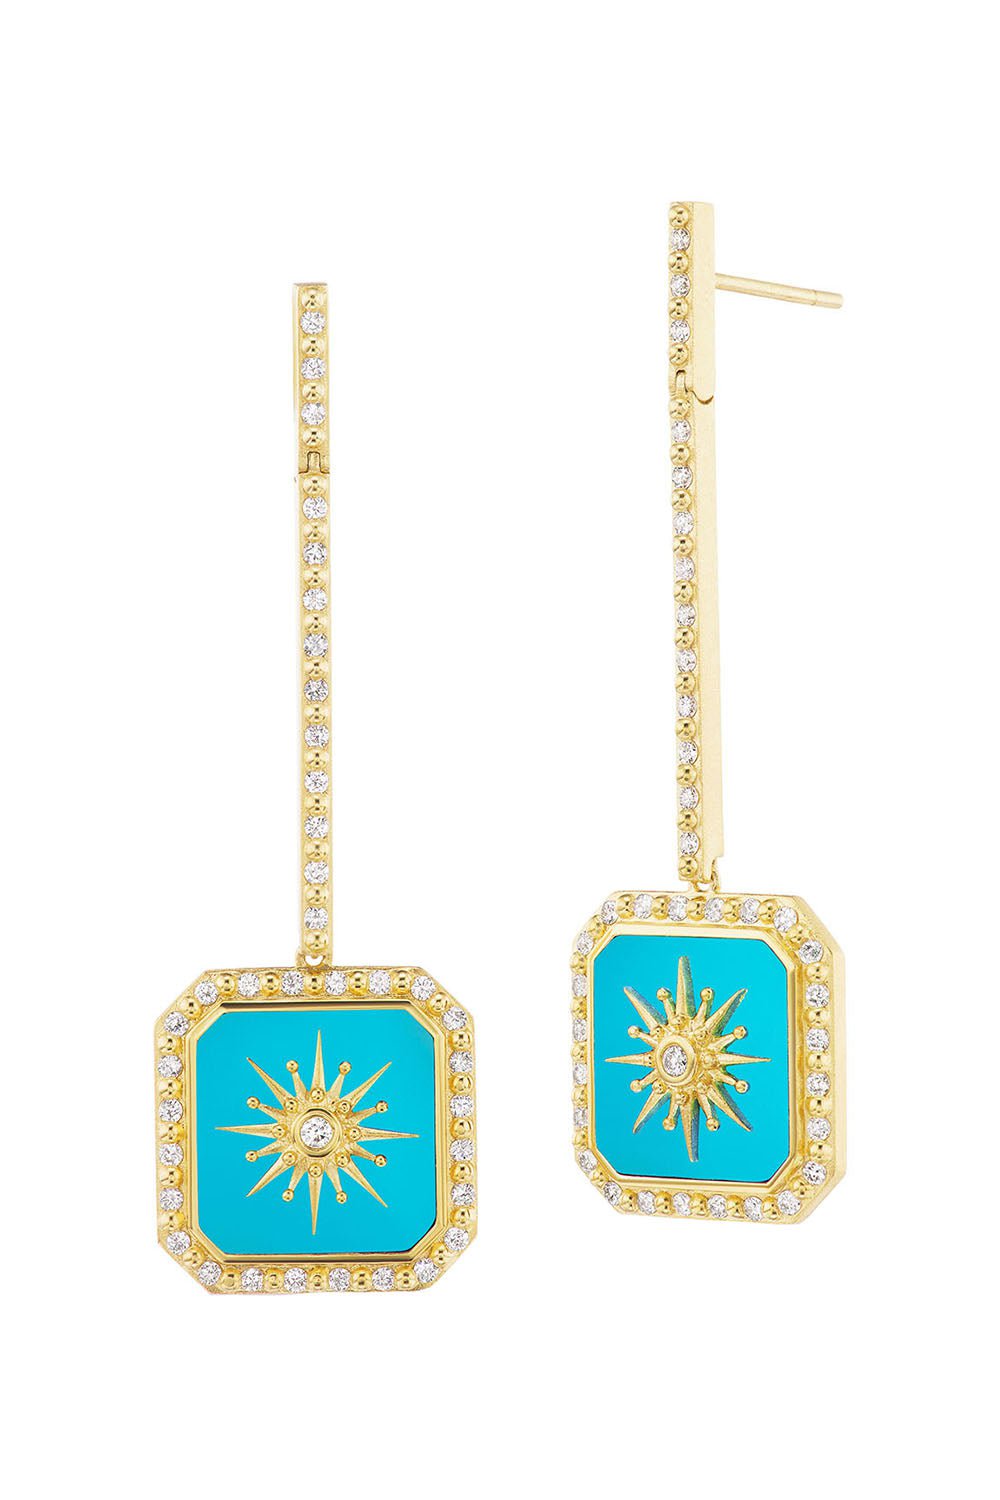 ORLY MARCEL-GUIDING STAR DROP EARRINGS-YELLOW GOLD